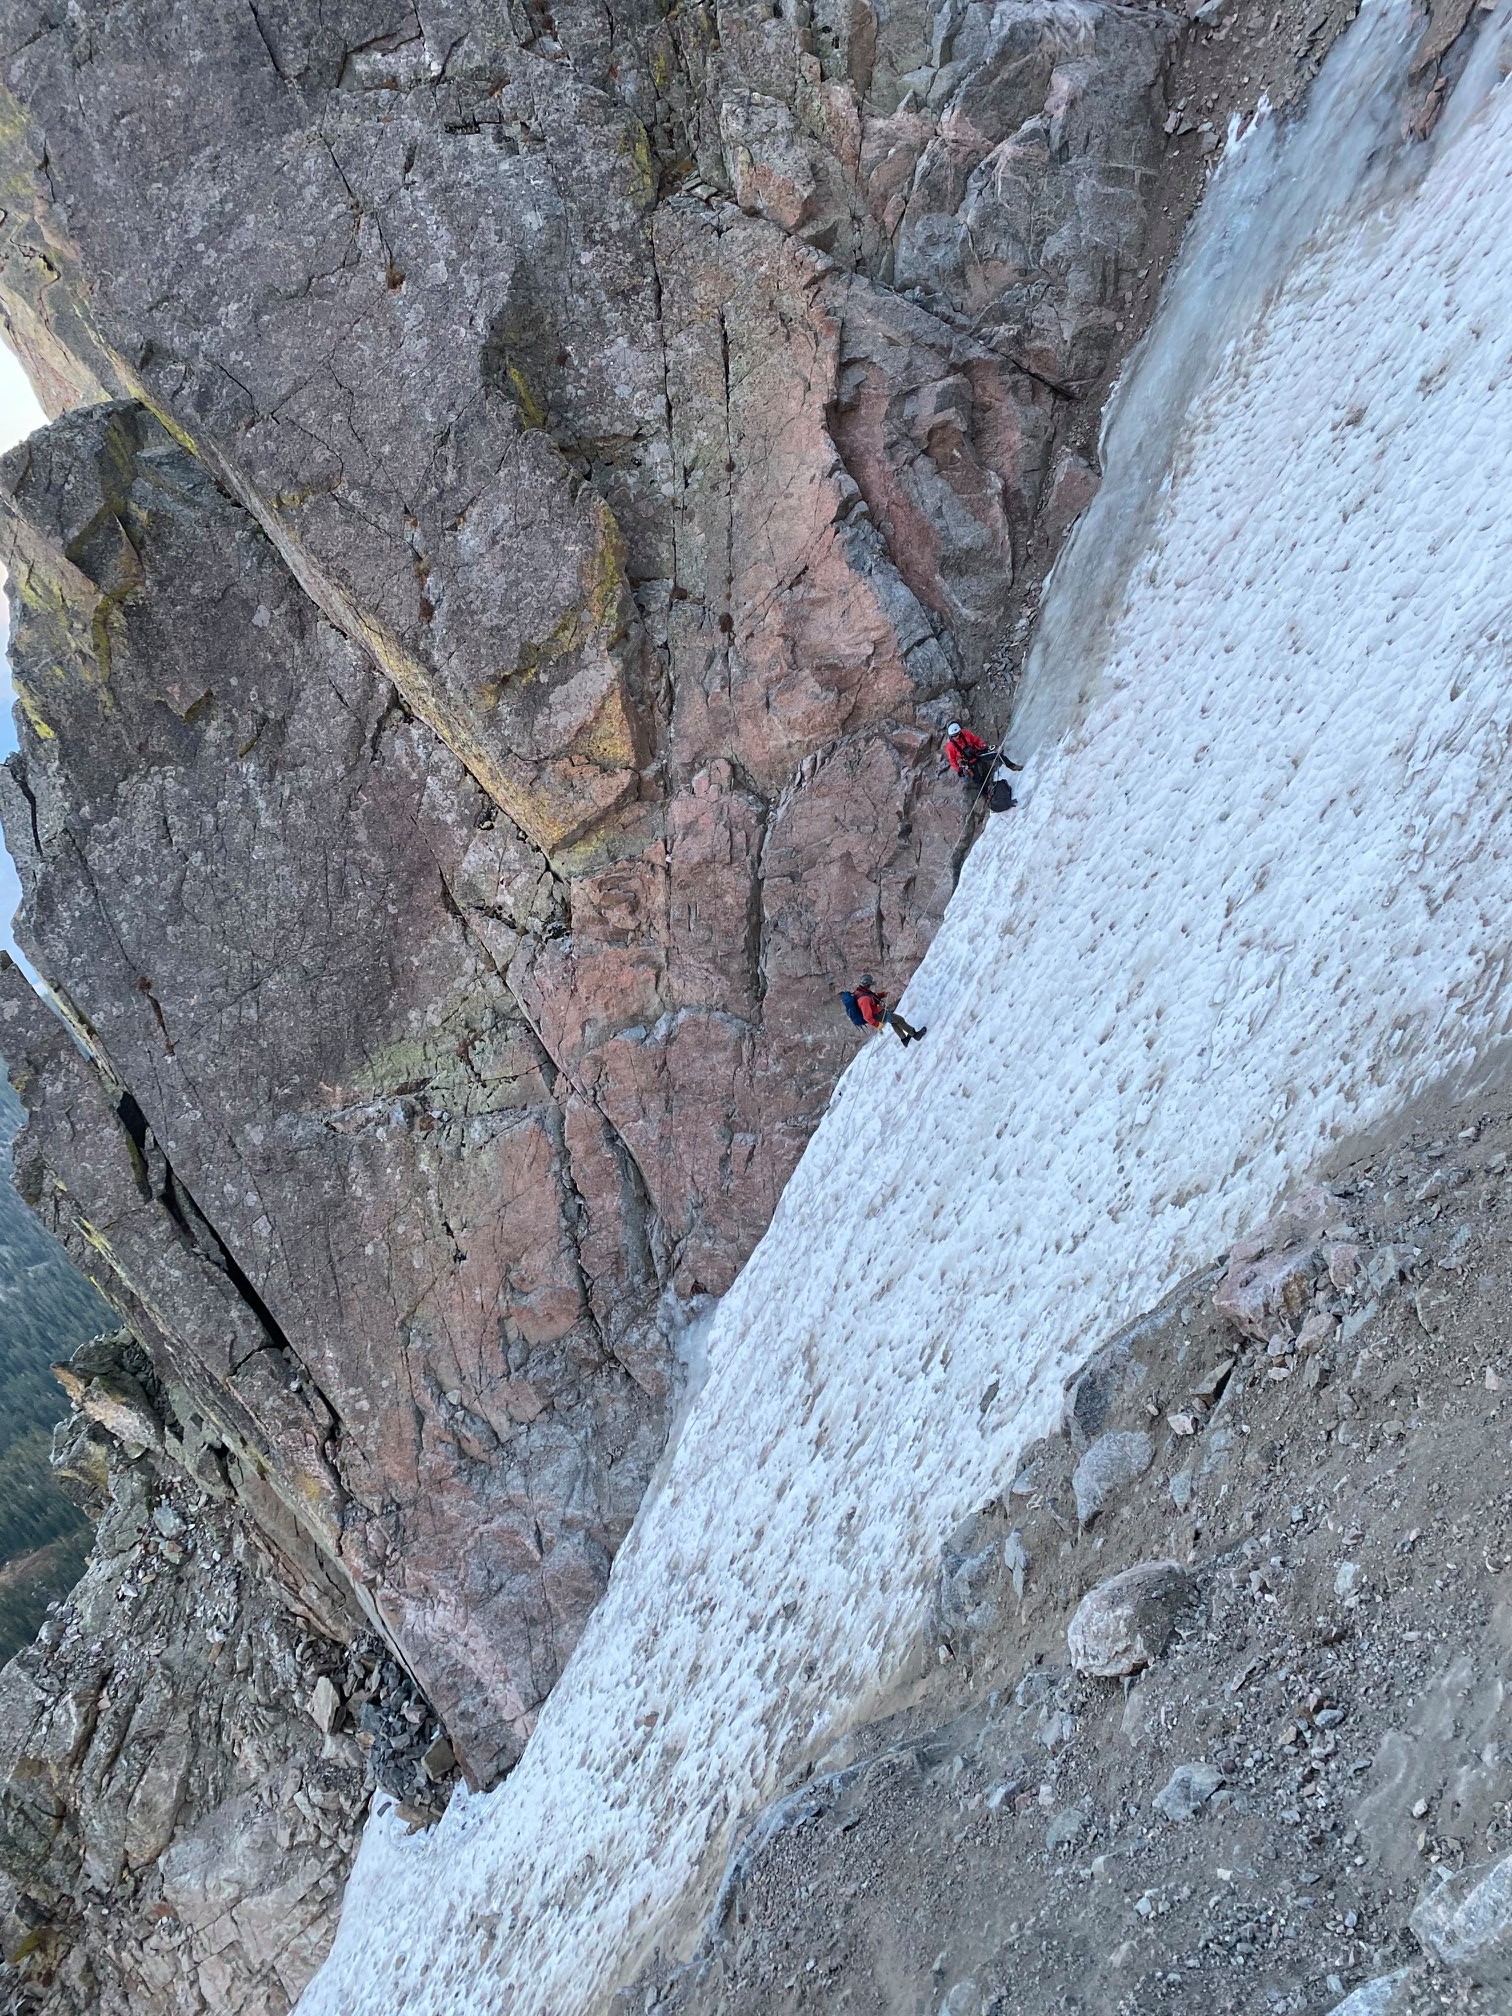 Two people rappel down a steep snow field.